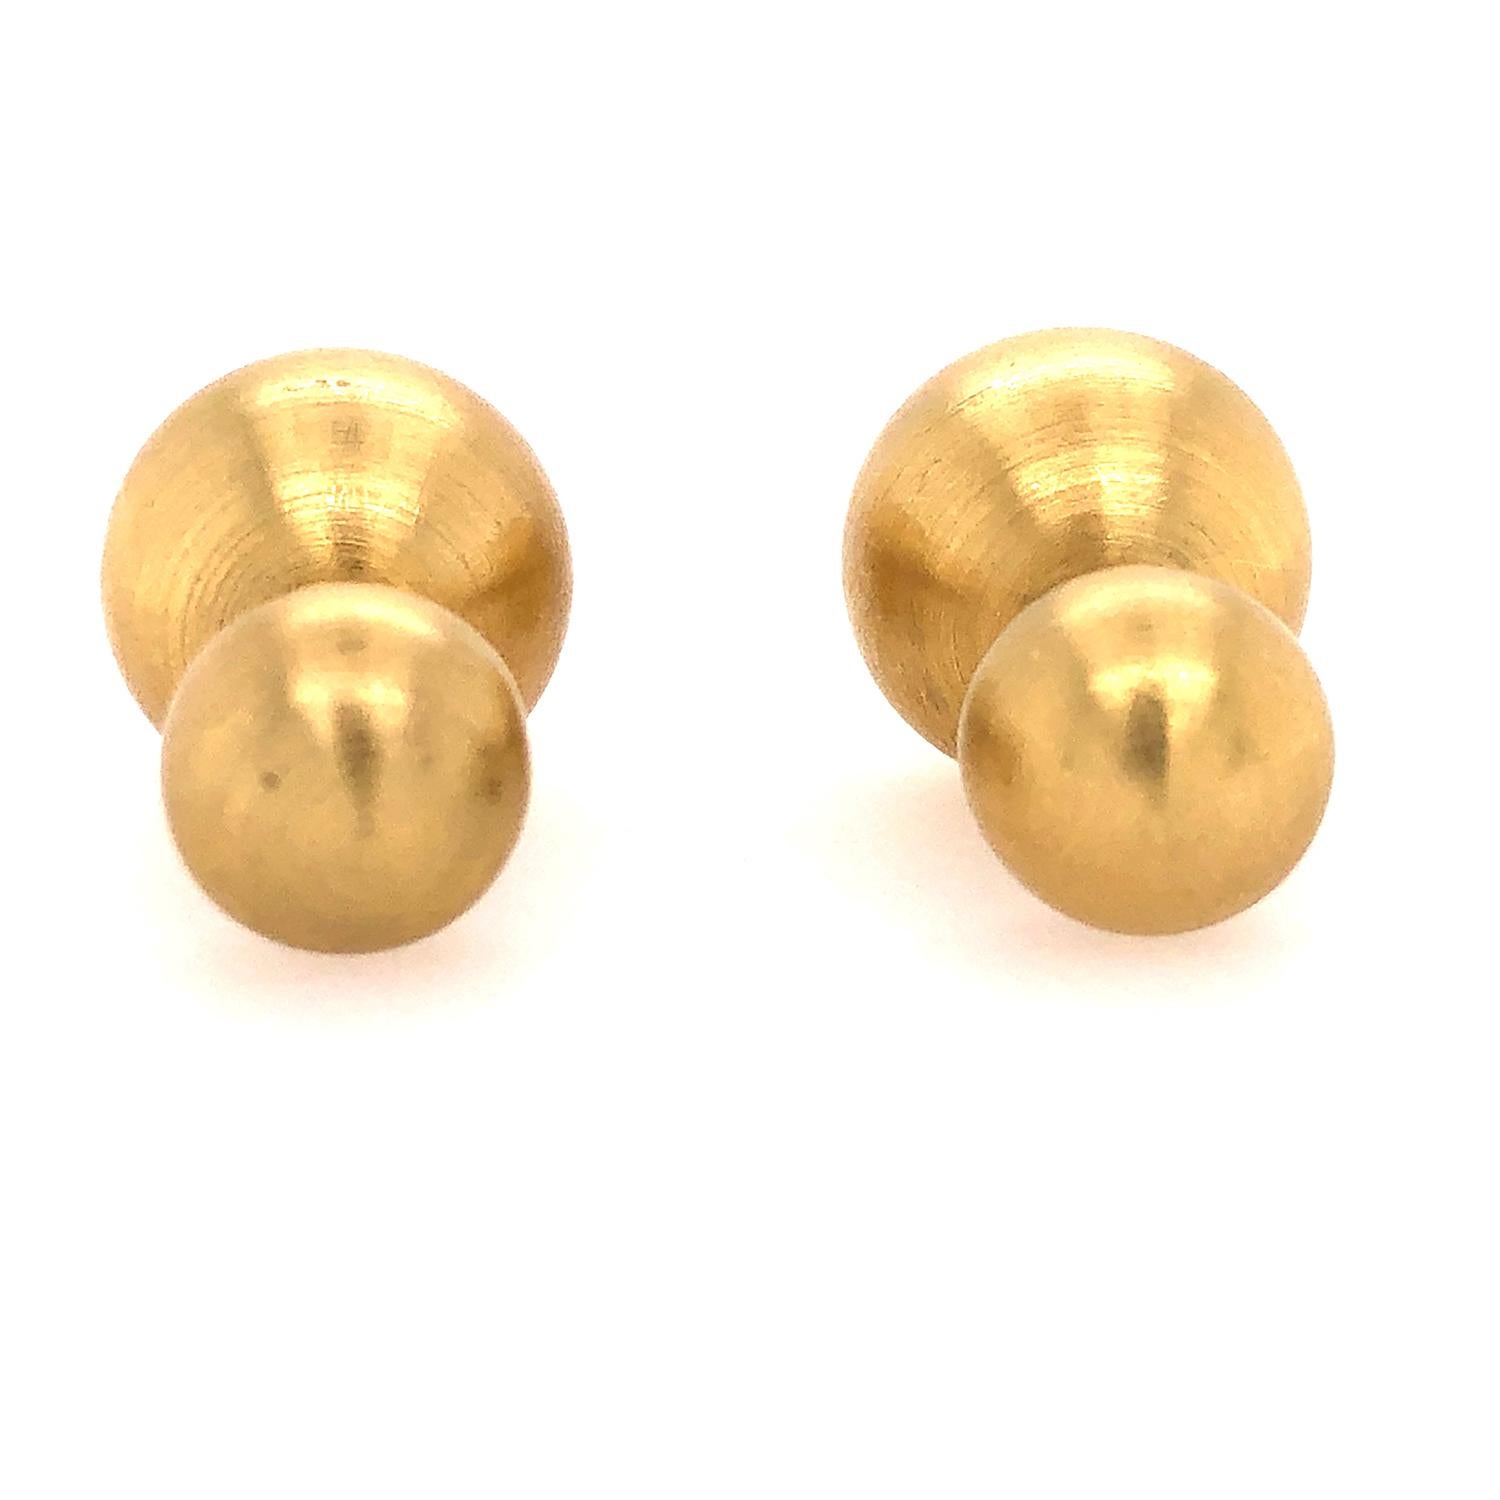 18kt:16.75g
Size: 8-14 MM